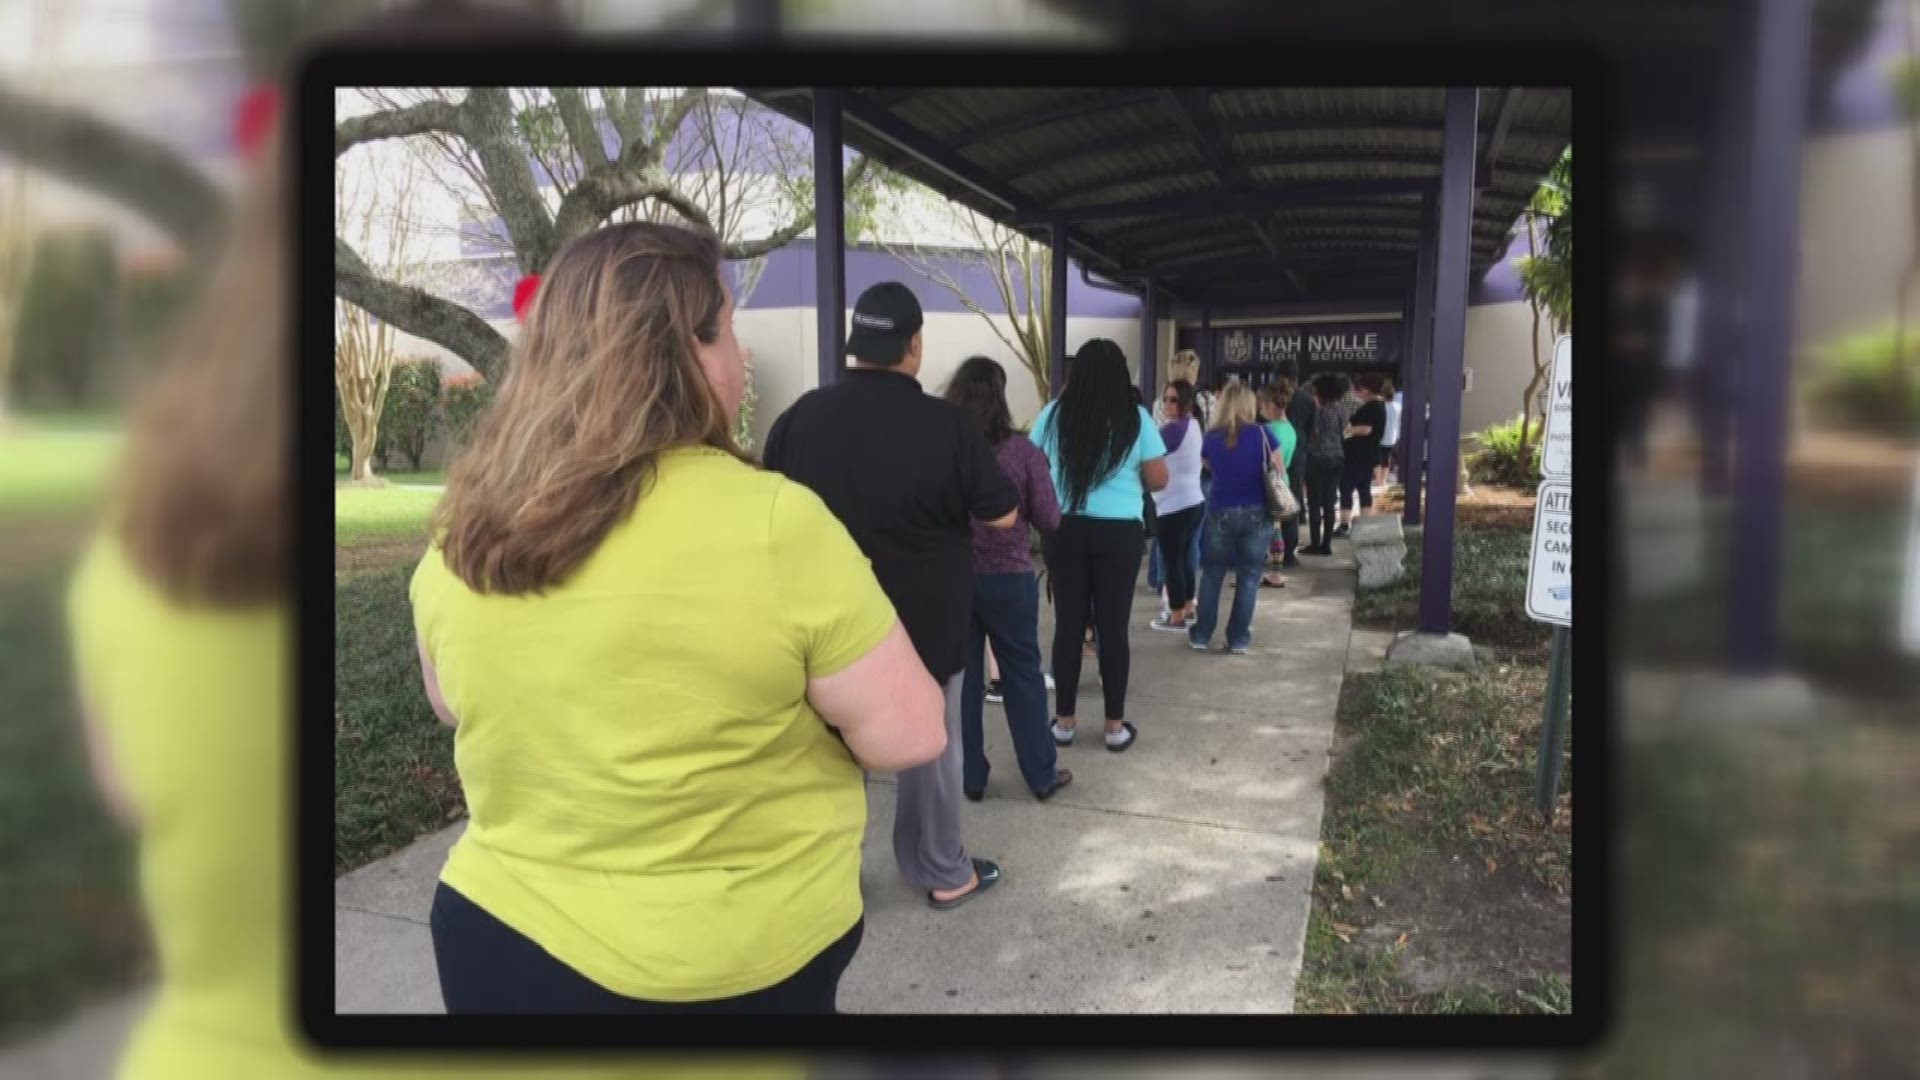 The St. Charles Parish school system used social media this morning to address some  issues at Hahnville High School.